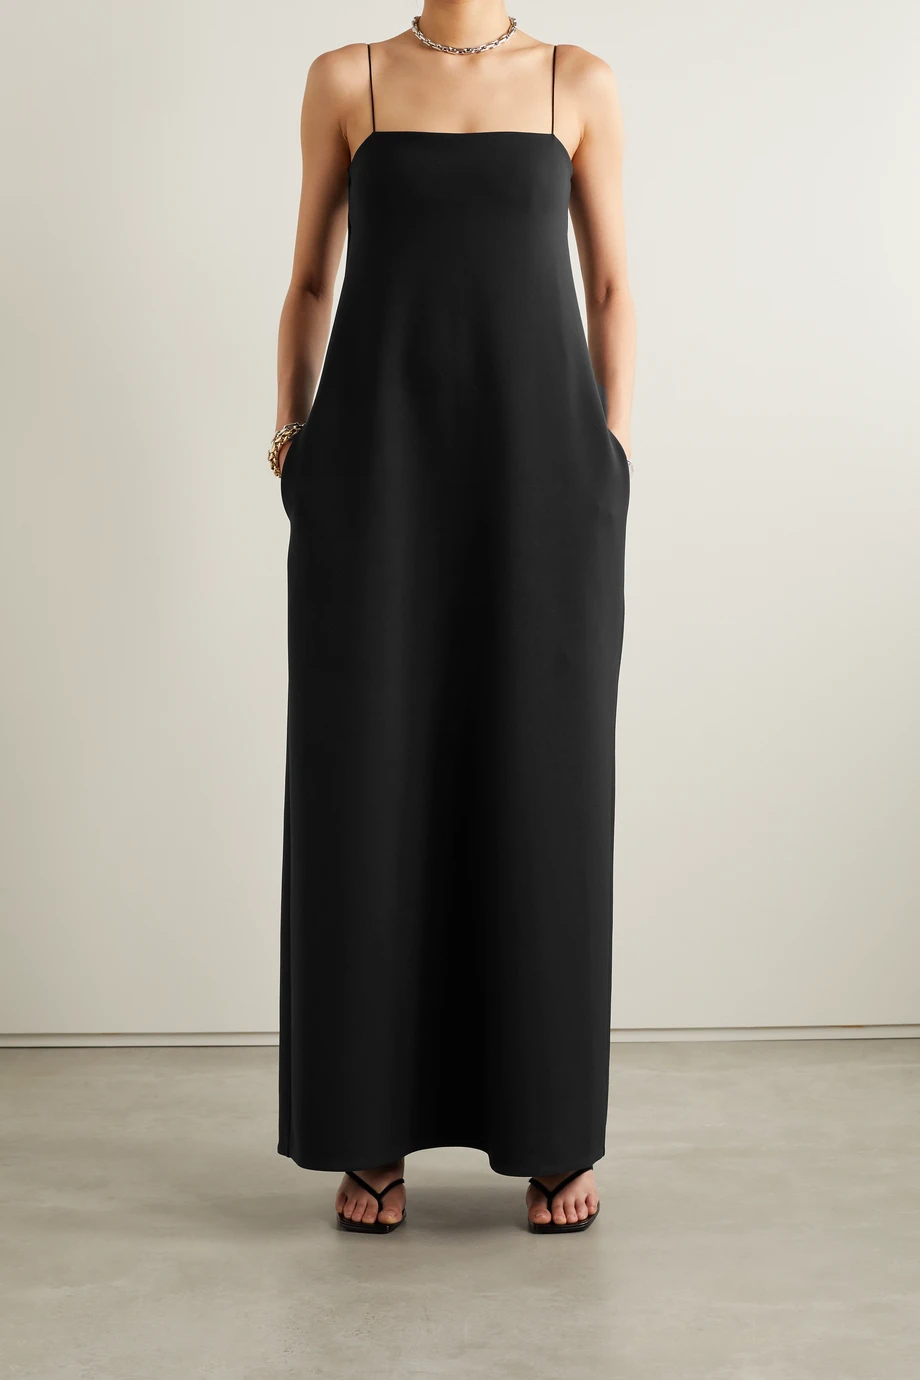 The Row simple and elegant maxi dress cut from smooth, stretchy scuba that skims your frame. Square neckline and thin shoulder straps. 2 hidden side pockets.